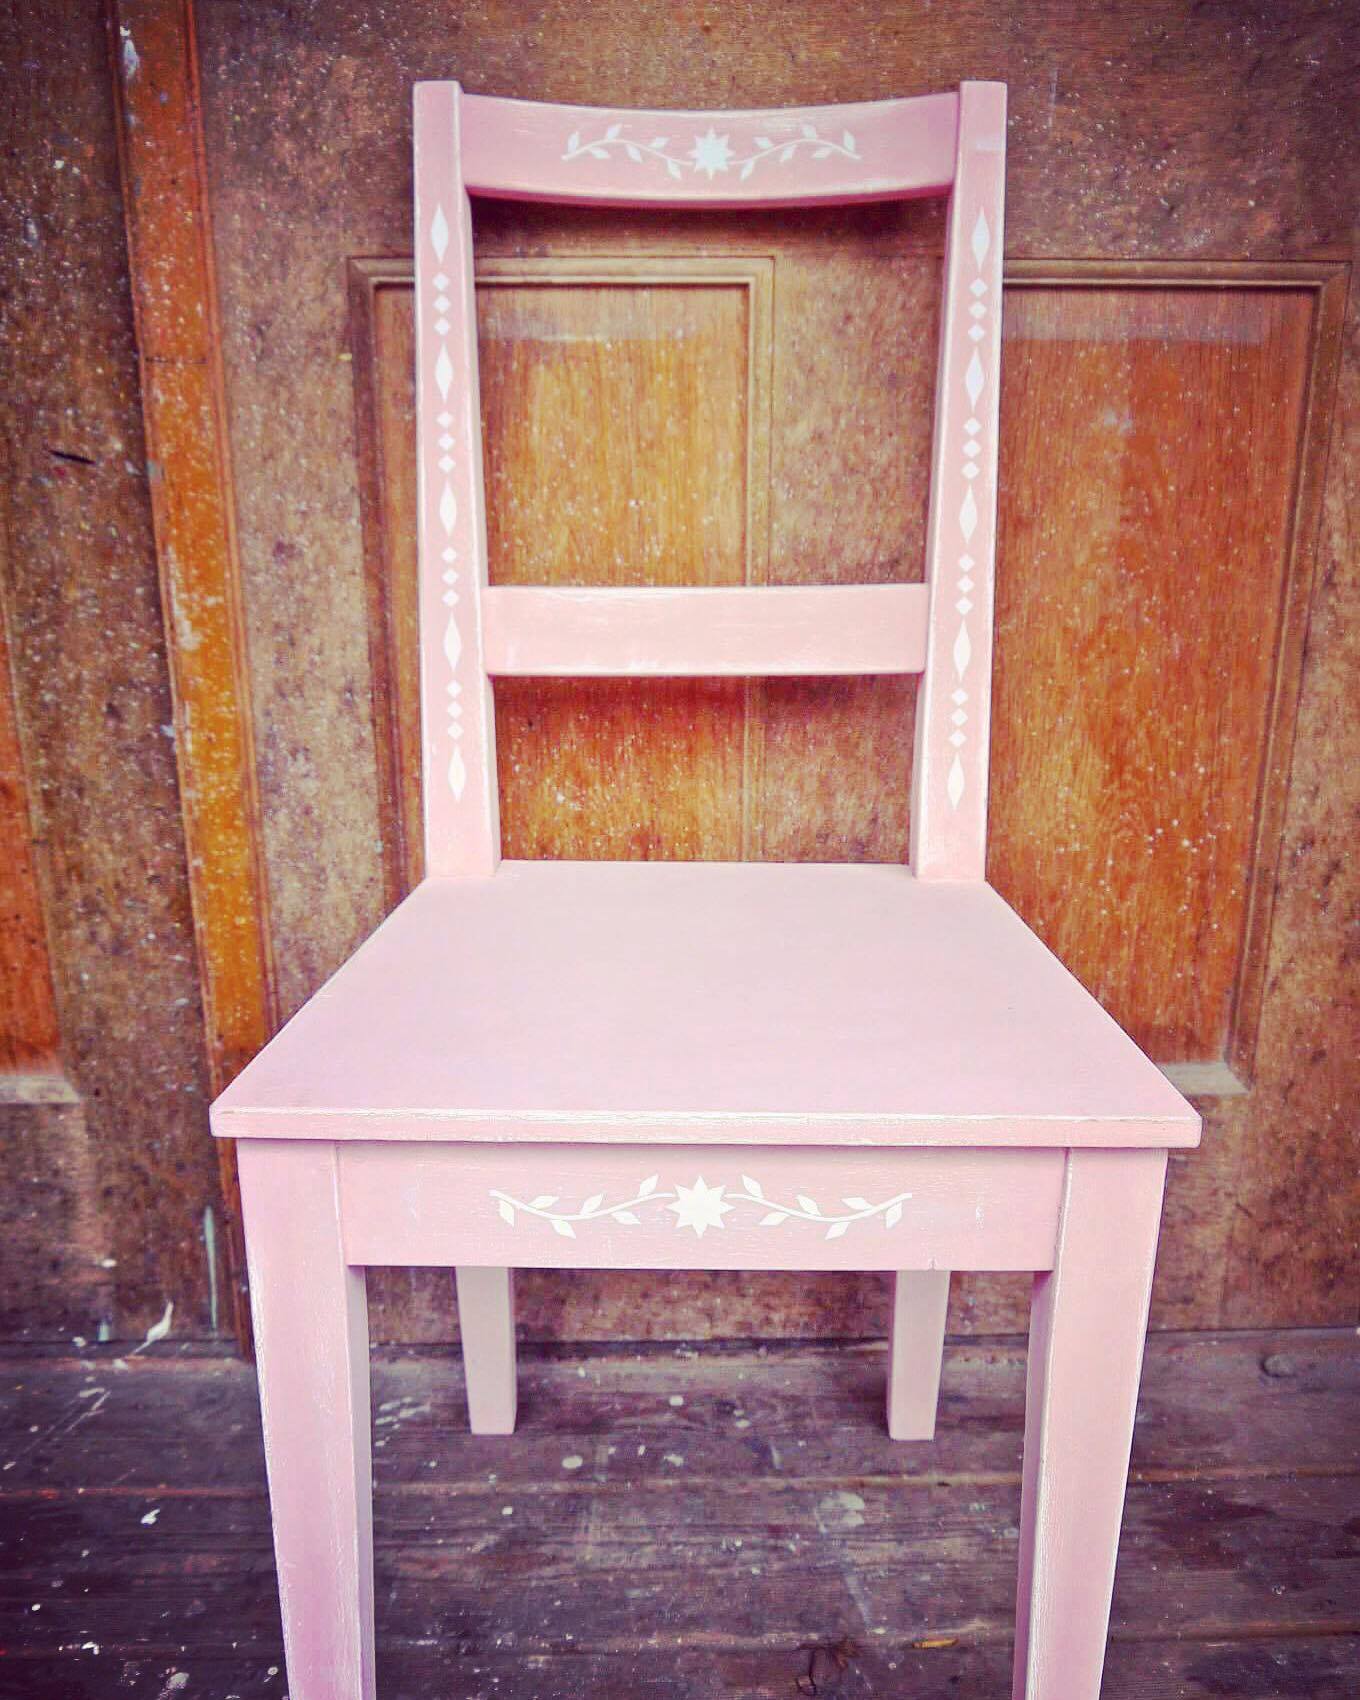 Modern chair update painted in white and pink with beautiful folk art white stencil design